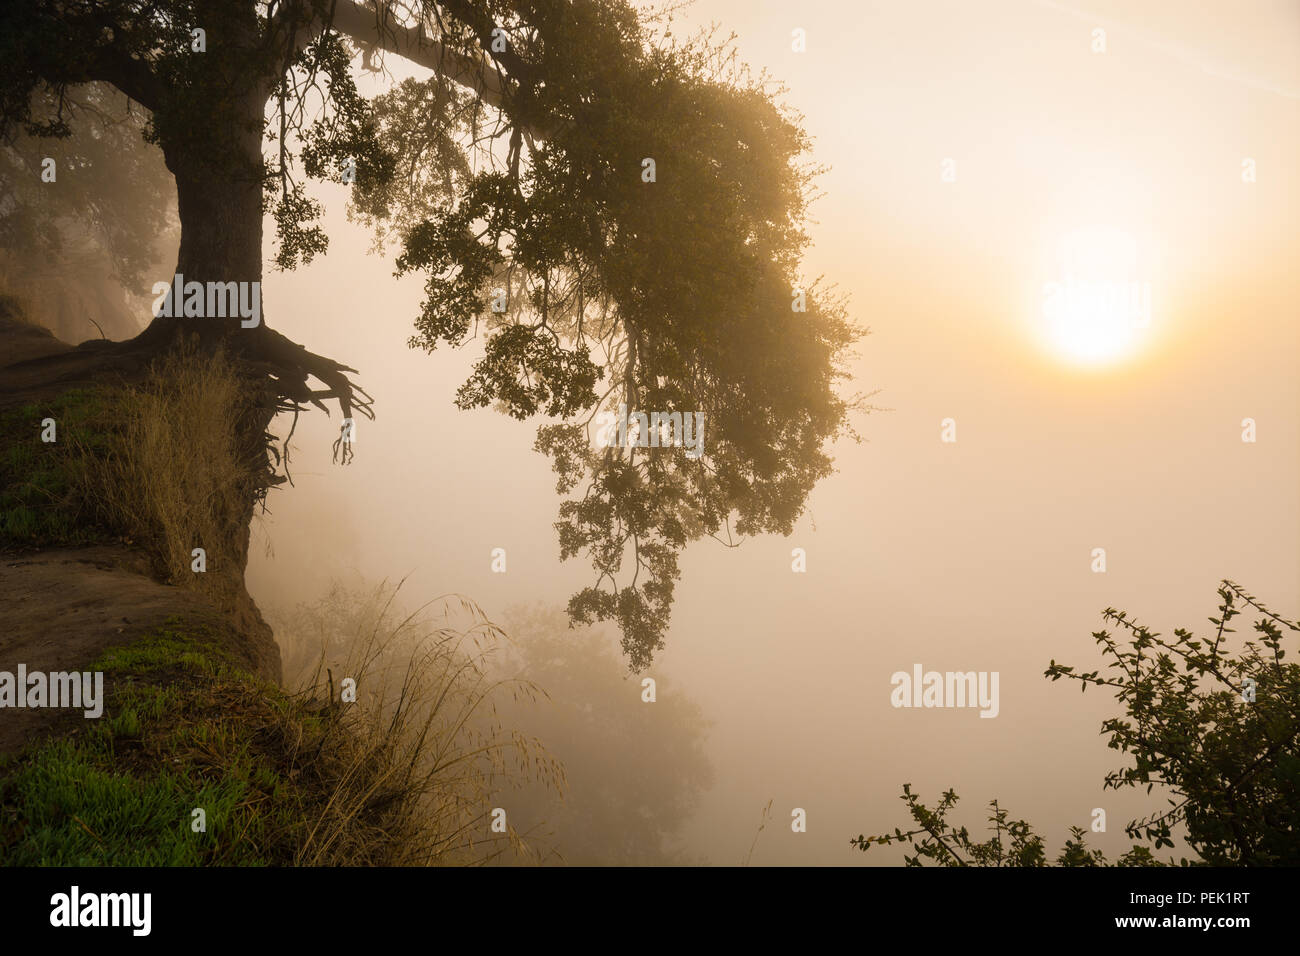 The sun rises through thick autumn fog hanging along the bluffs of the American River in Fair Oaks, California. Stock Photo